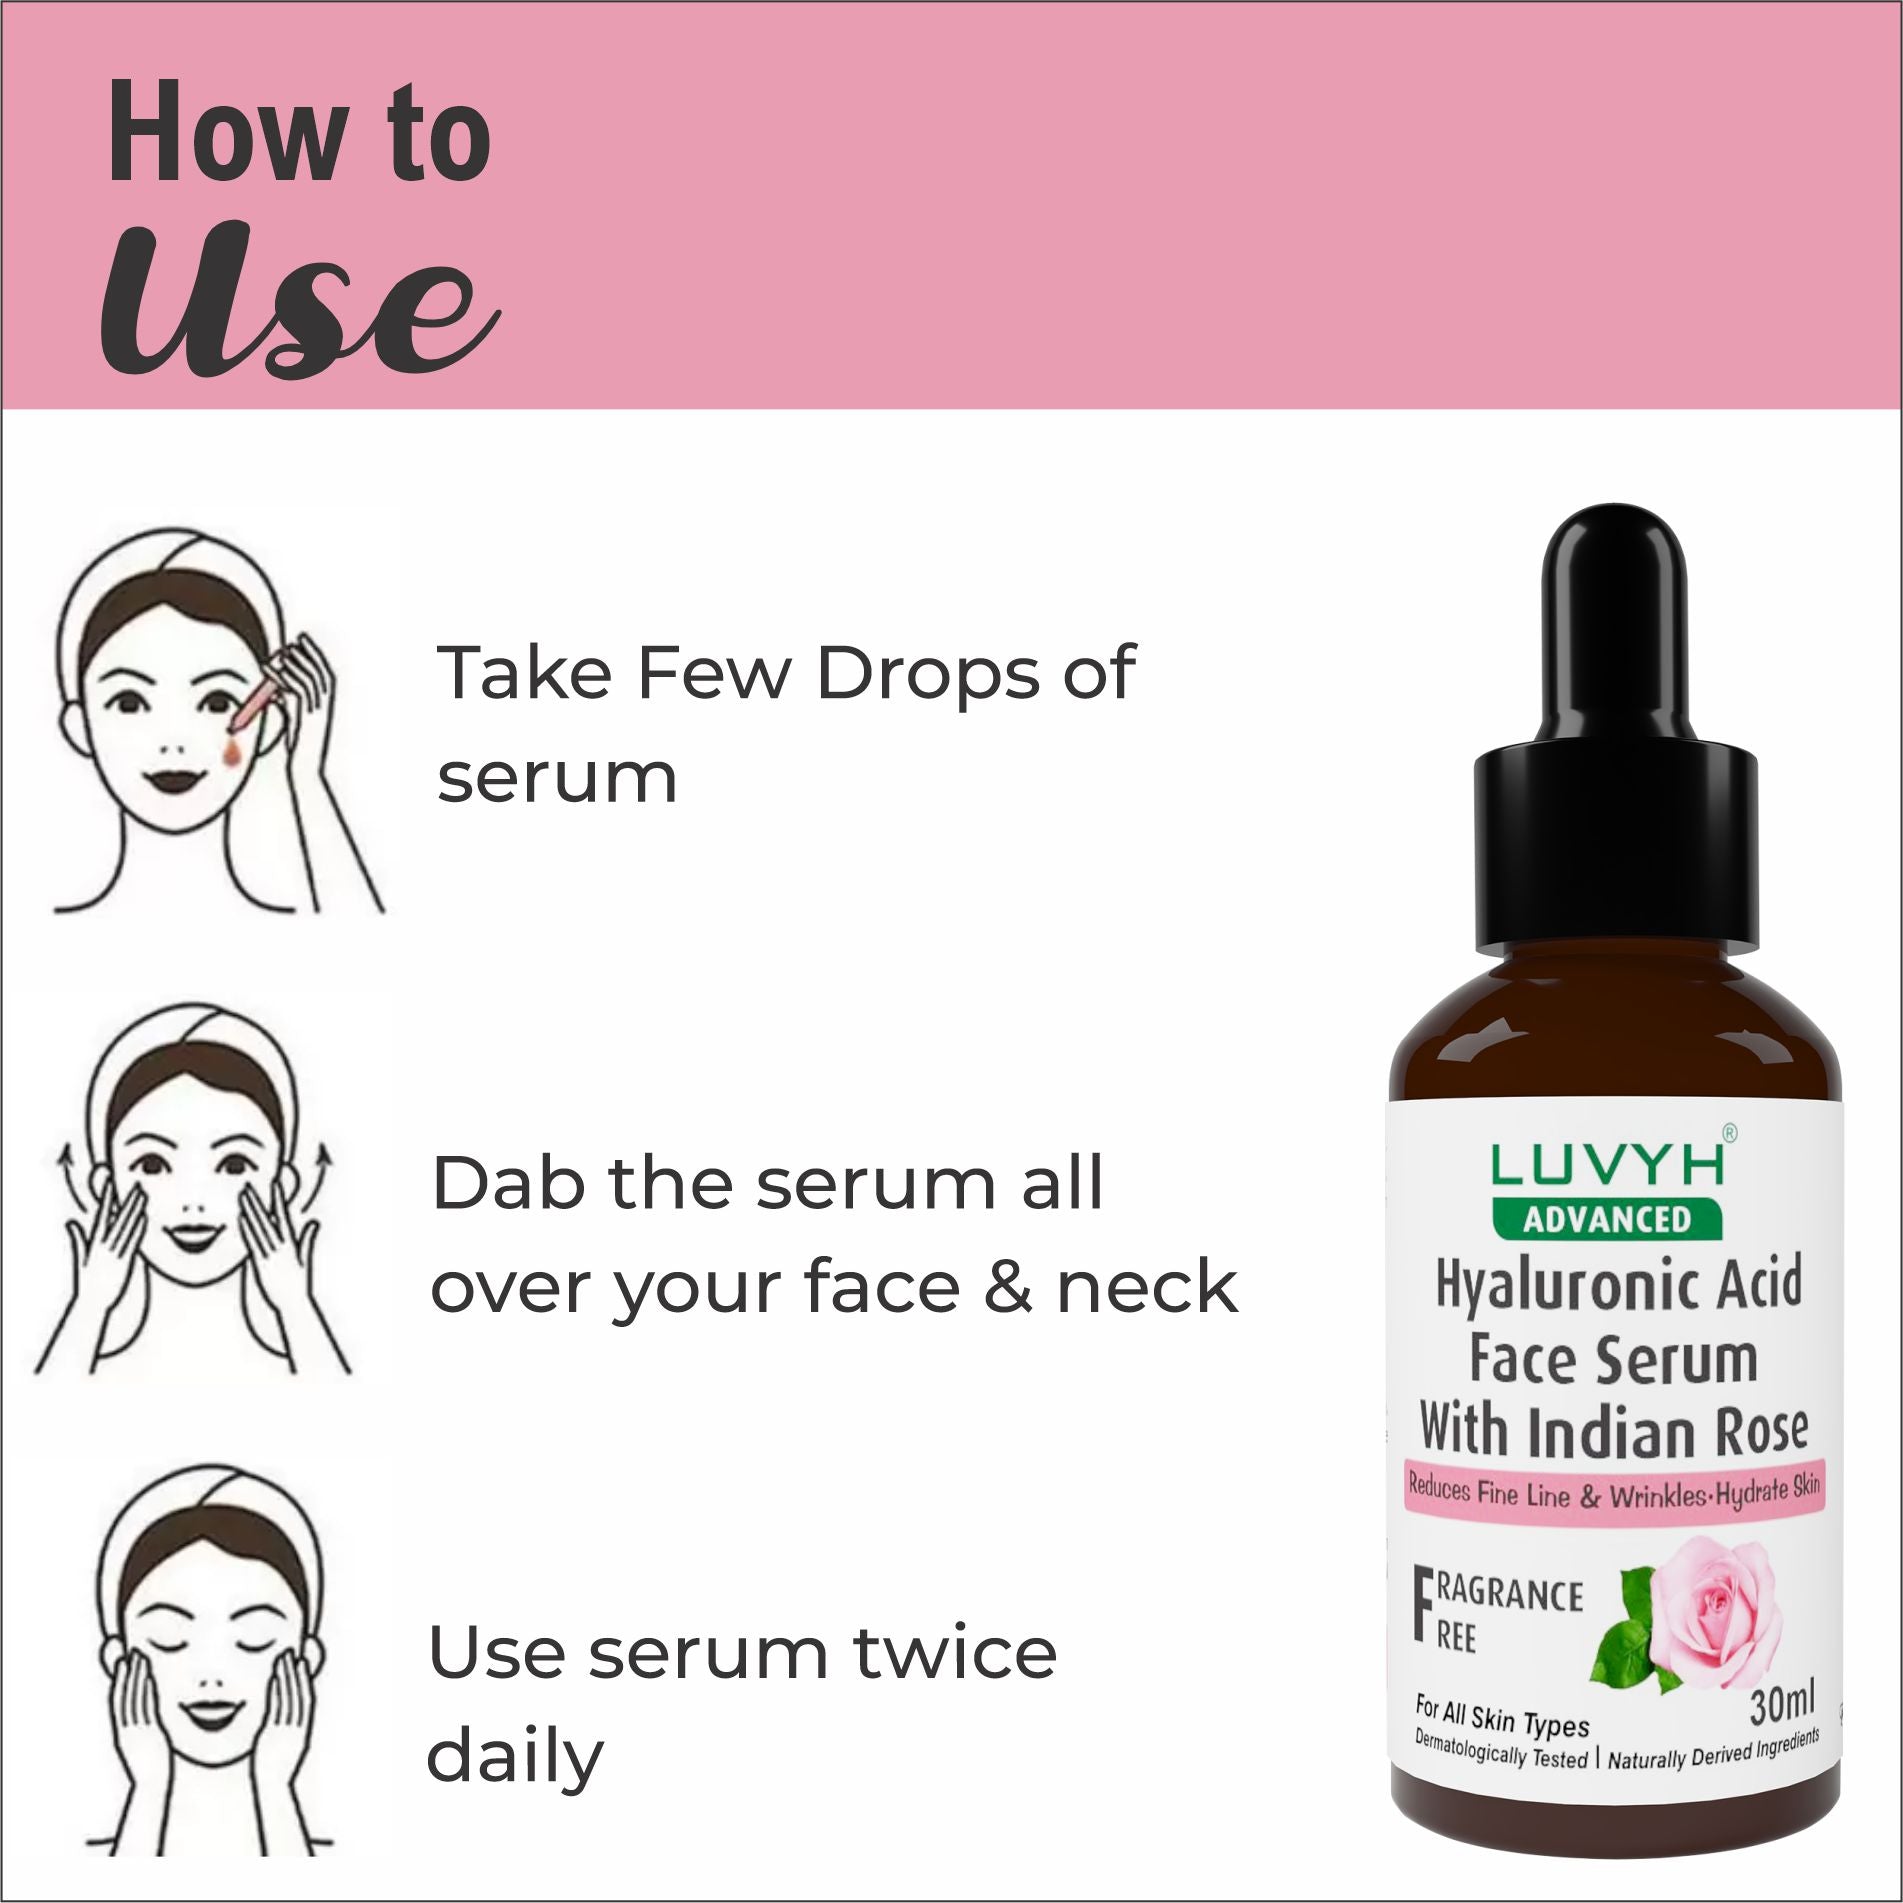  How to Use Hyaluronic Acid Face Serum with Indian Rose 